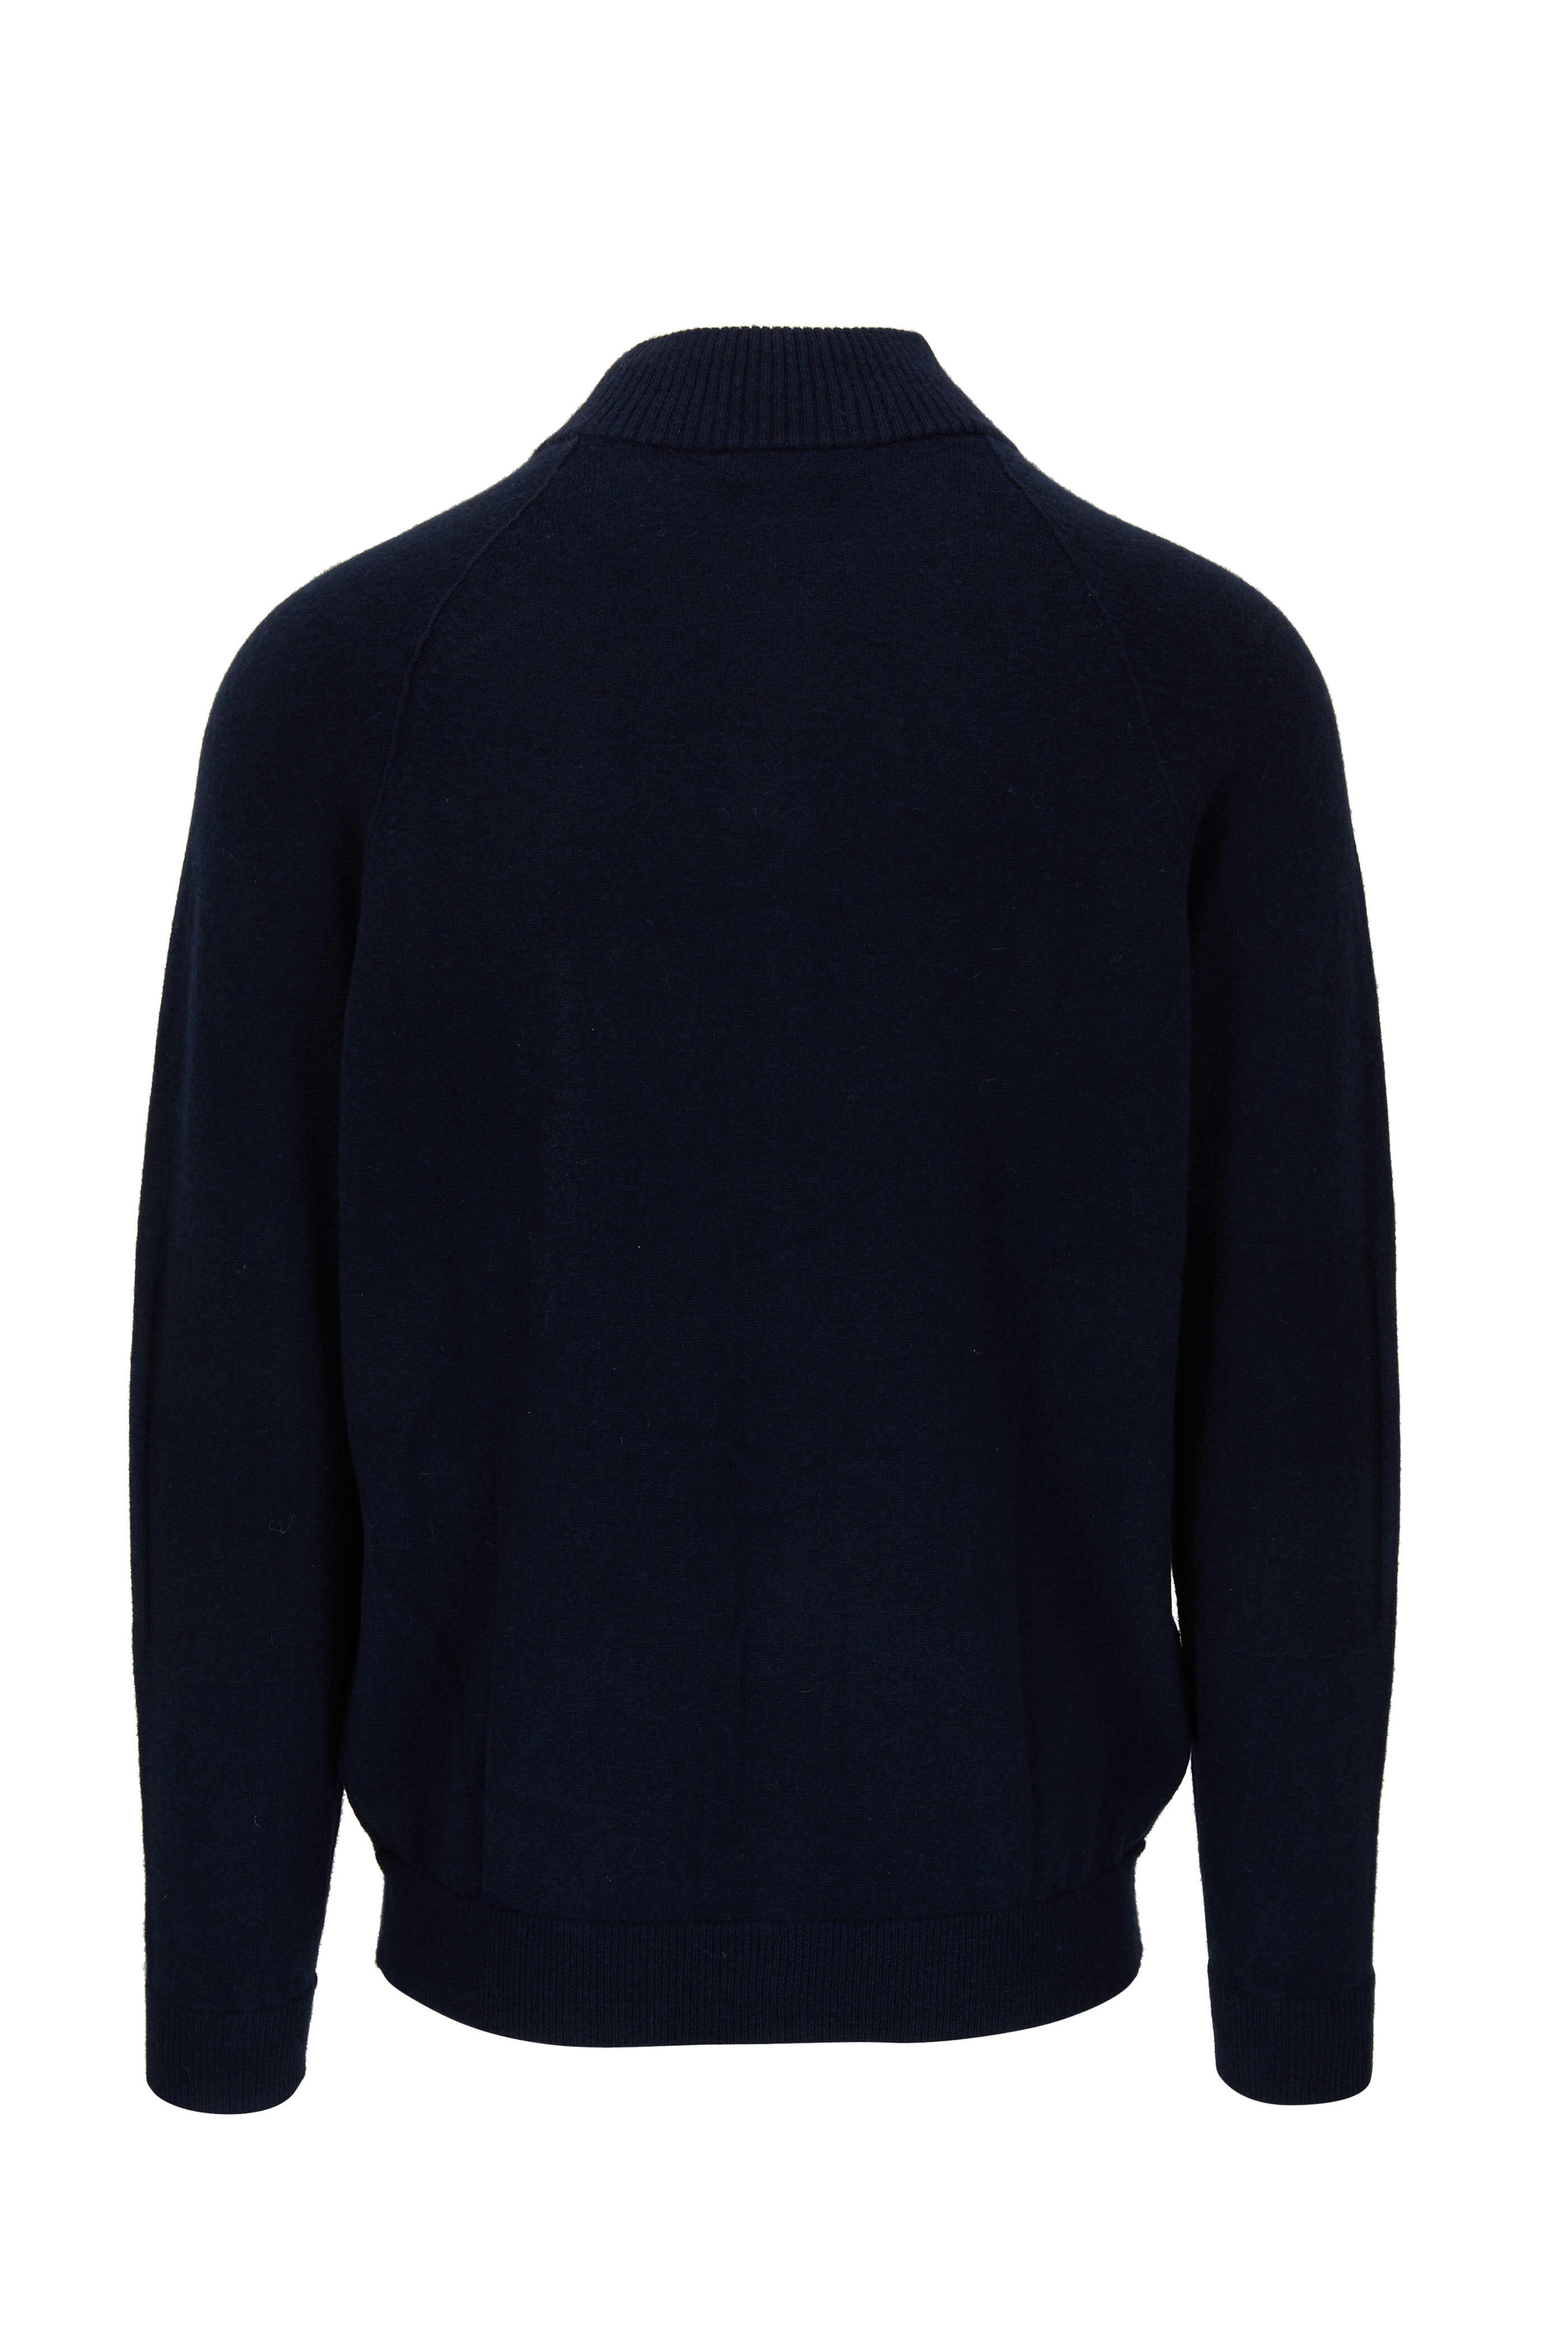 Kinross - Navy Blue Cashmere Full-Zip Sweater | Mitchell Stores